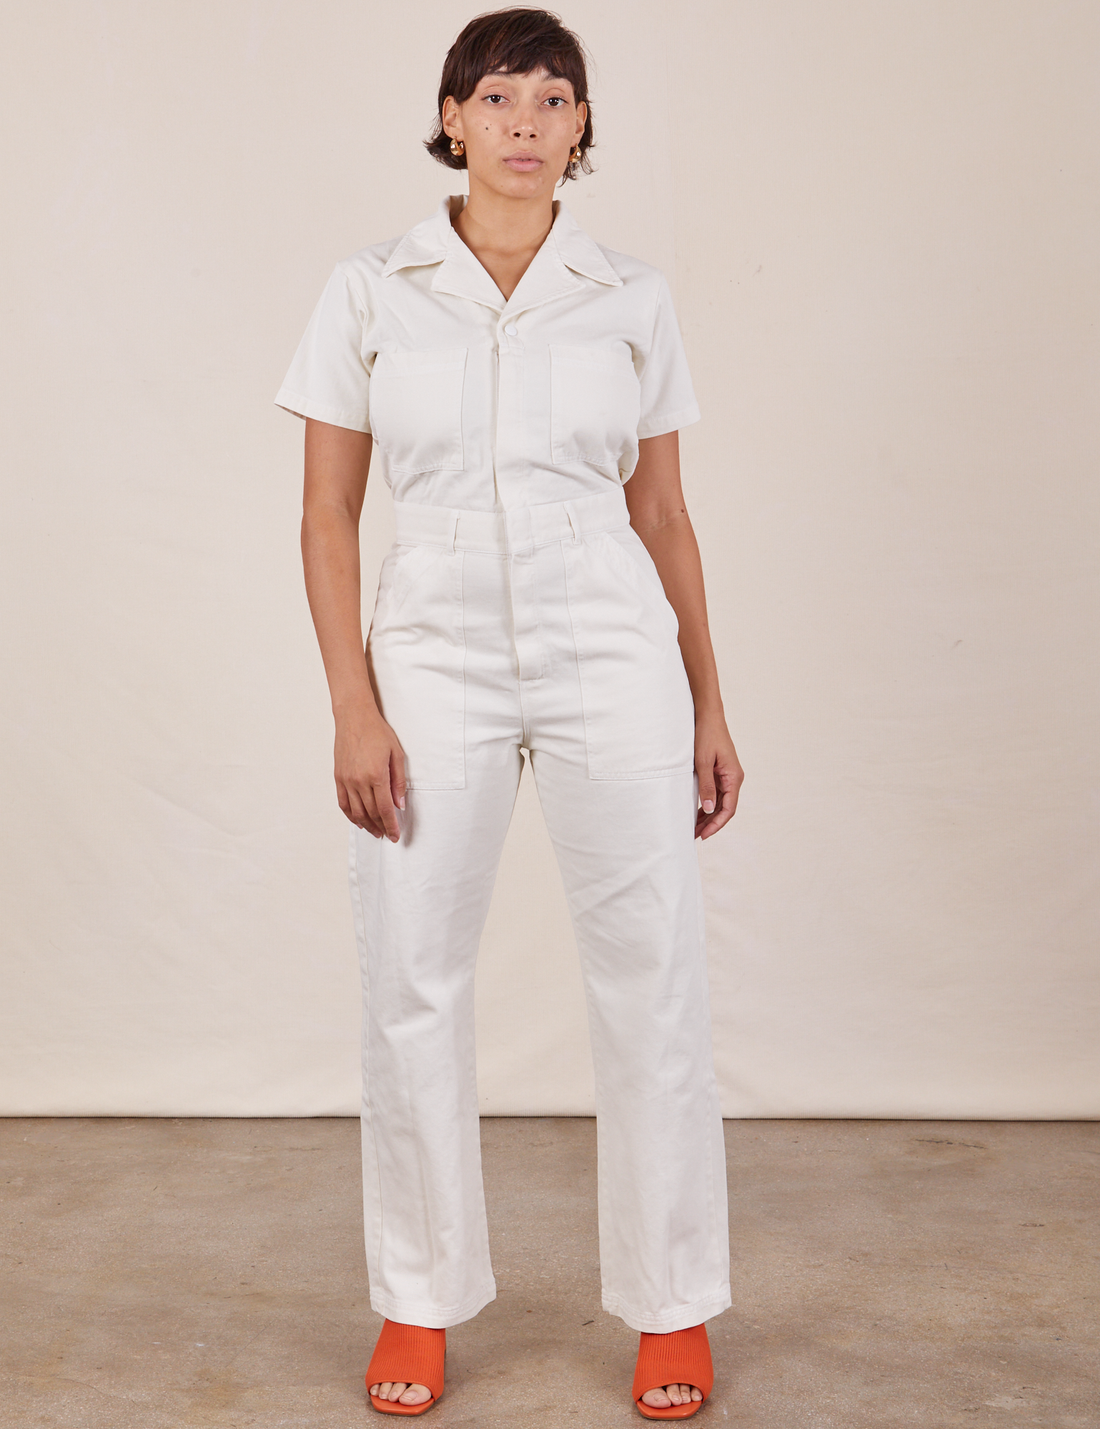 Tiara is 5'4" and wearing S Short Sleeve Jumpsuit in Vintage Tee Off-White